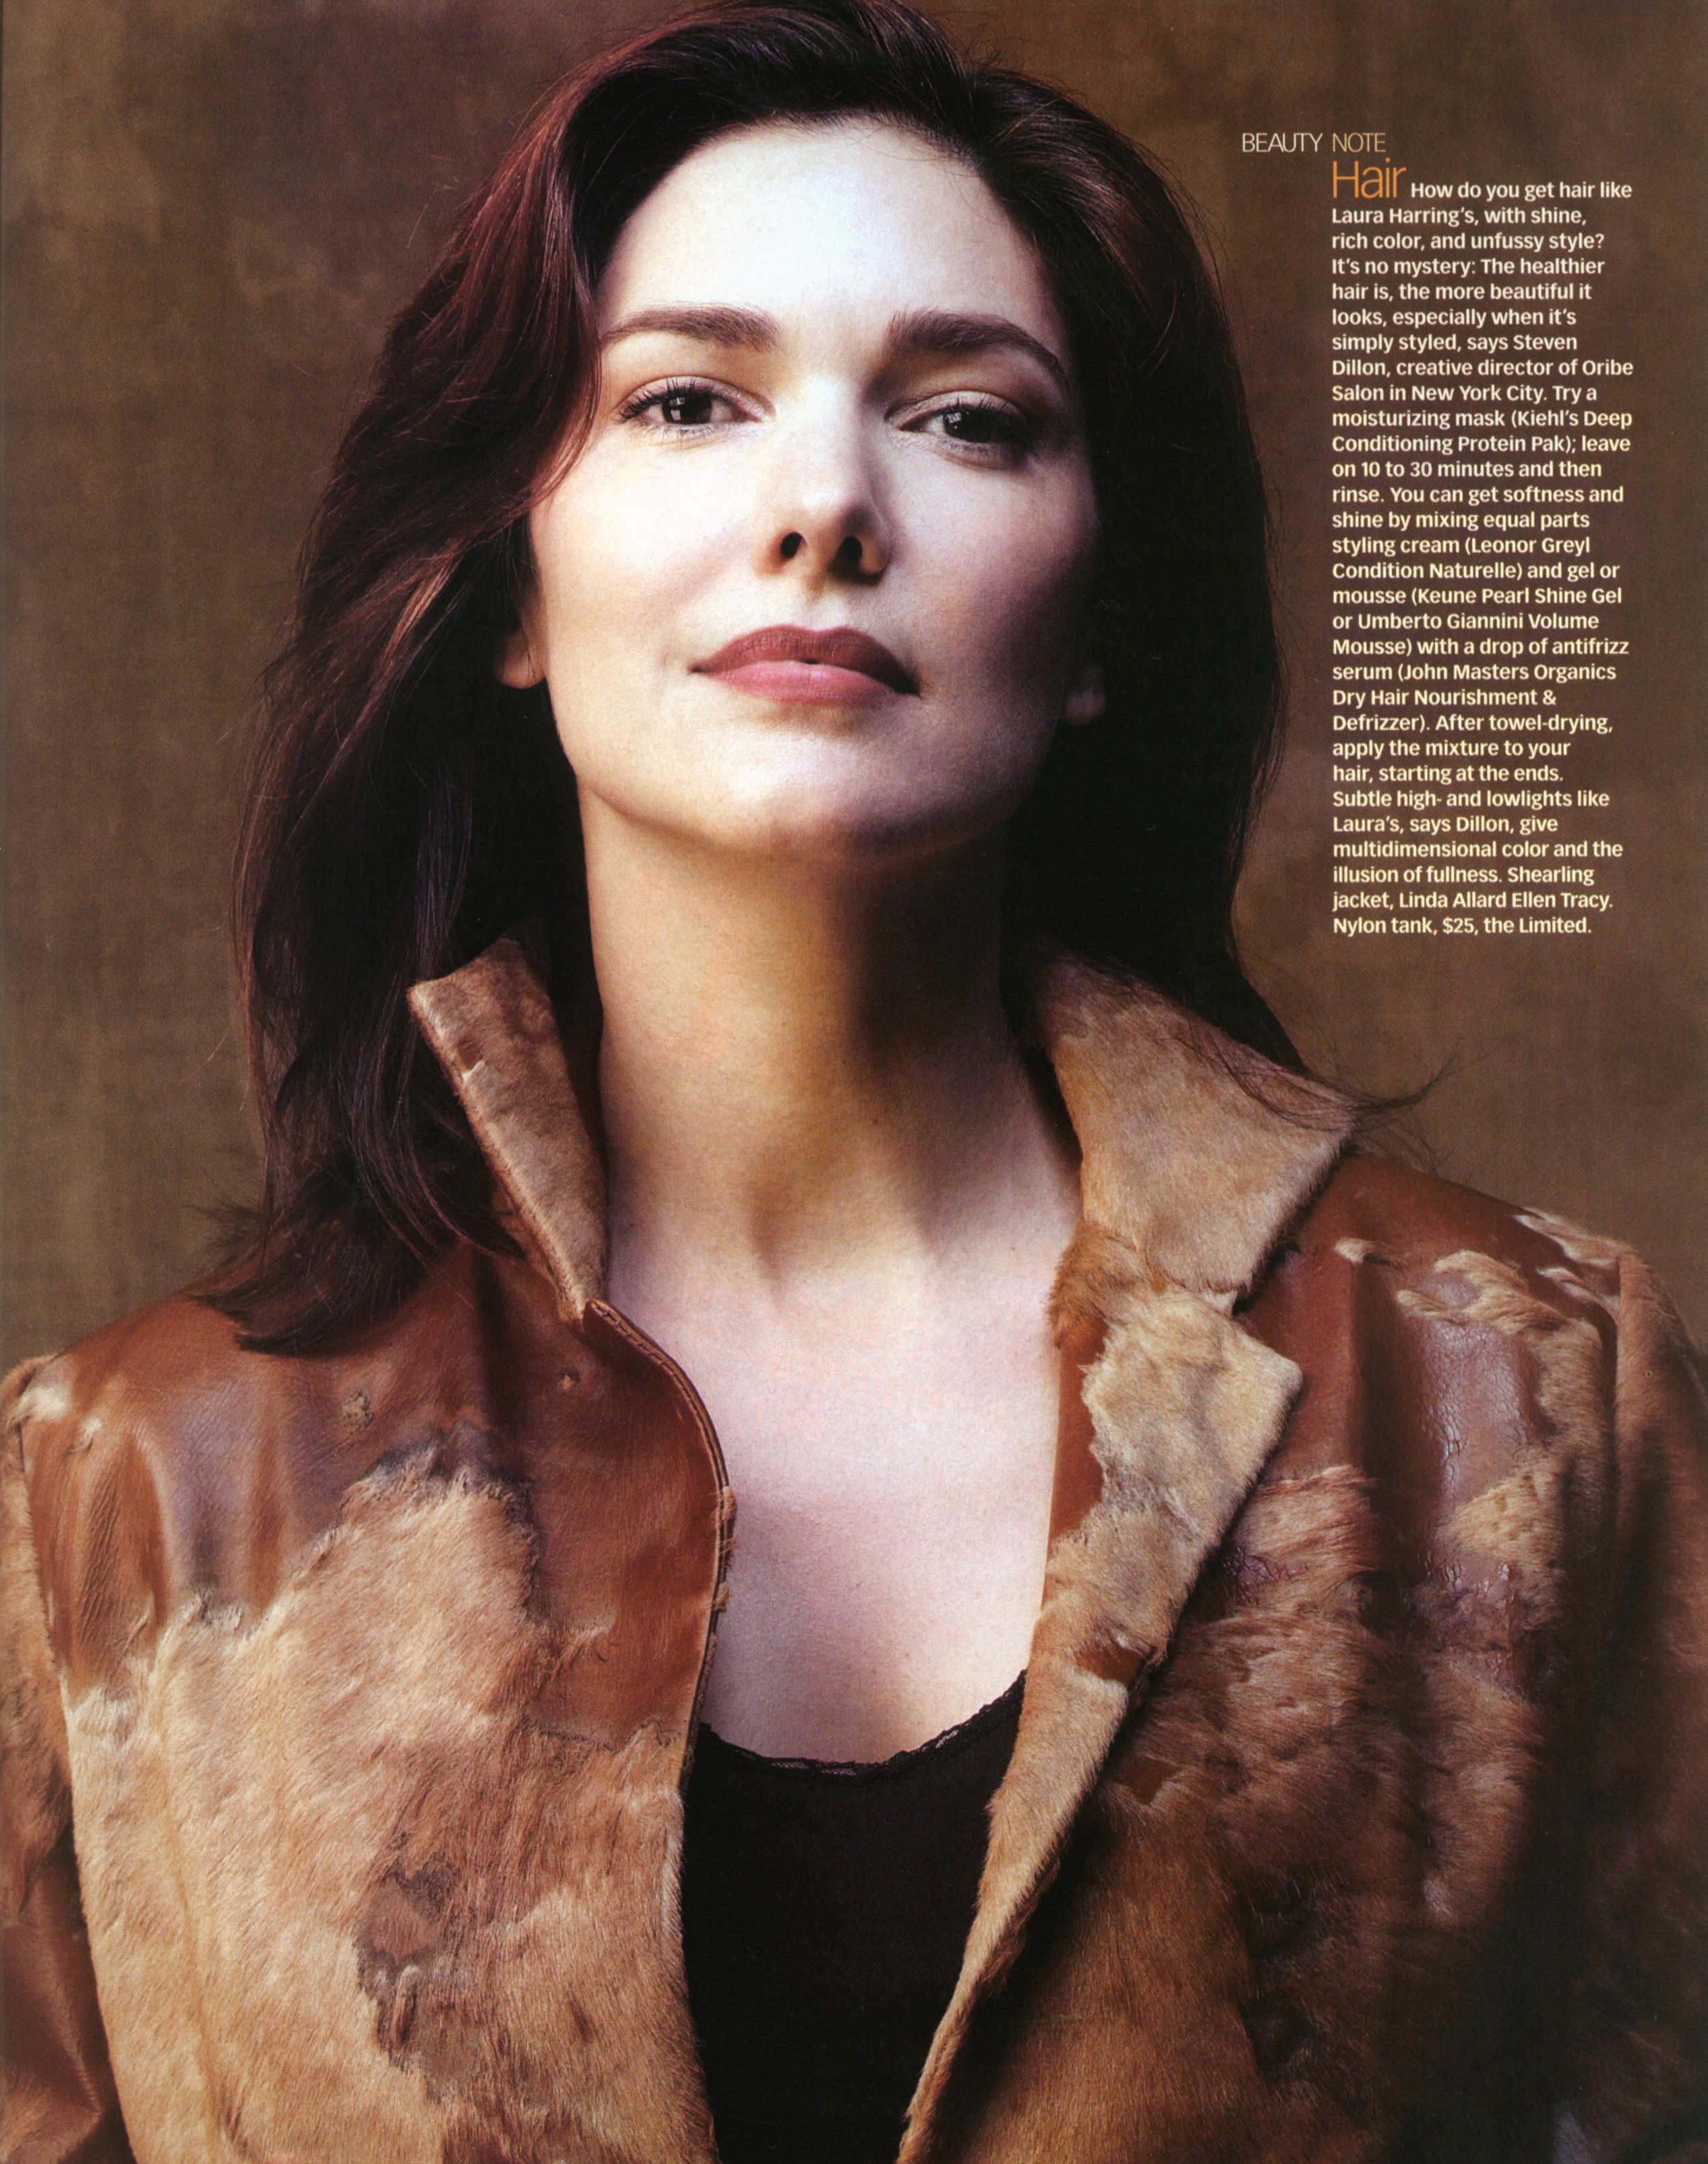 â†� Laura Harring pictures.